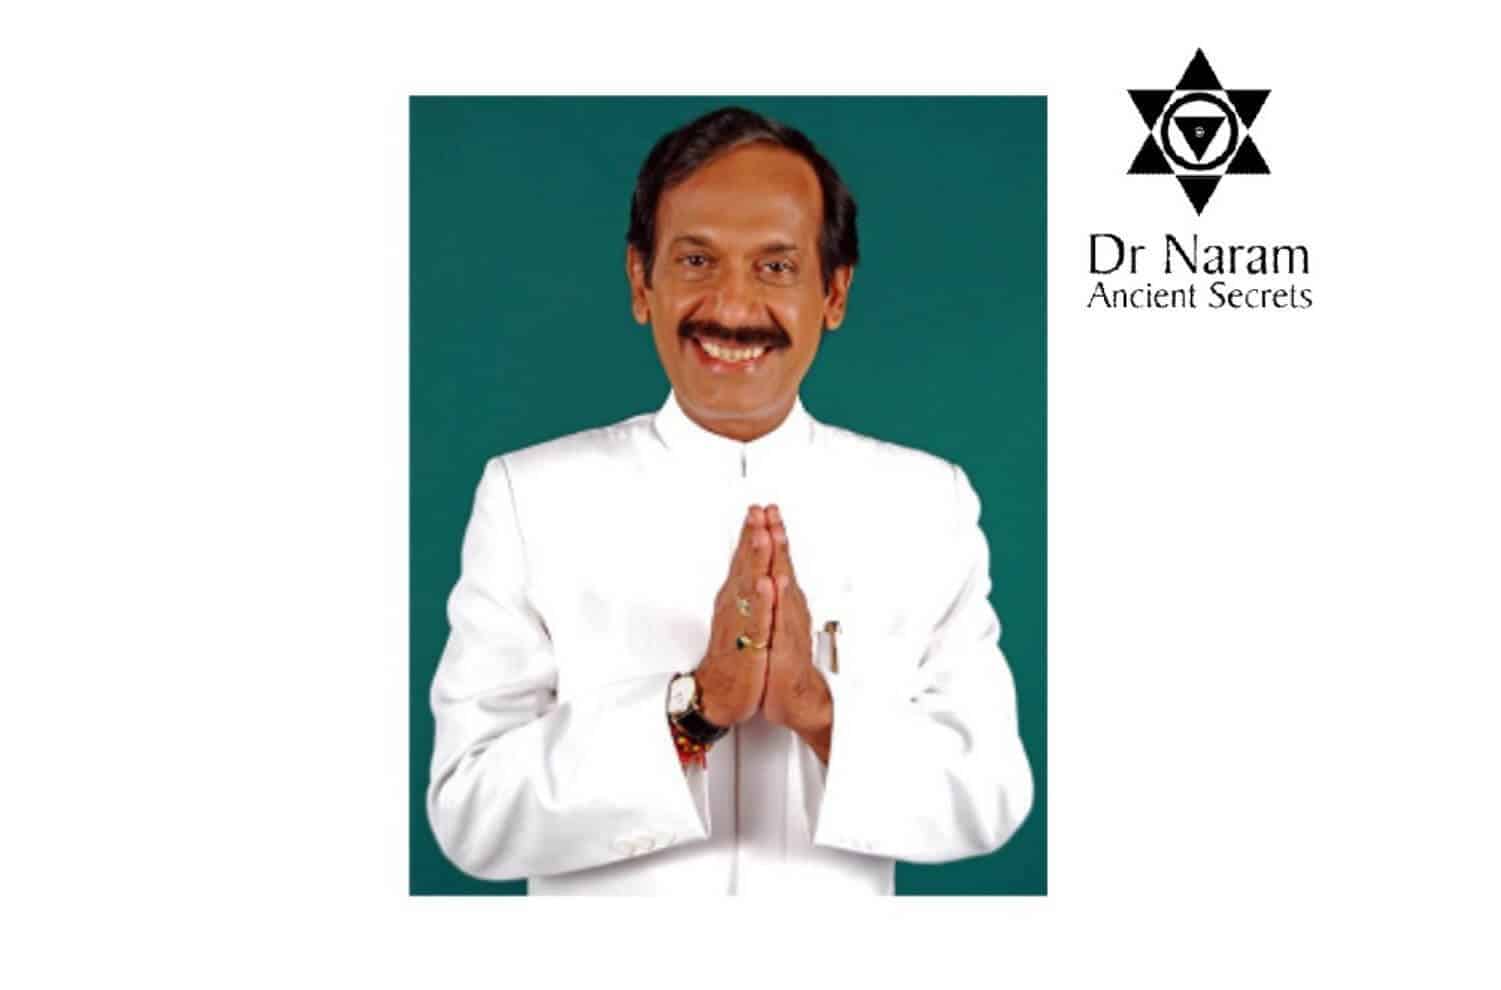 About Dr. Pankaj Naram and His Mission